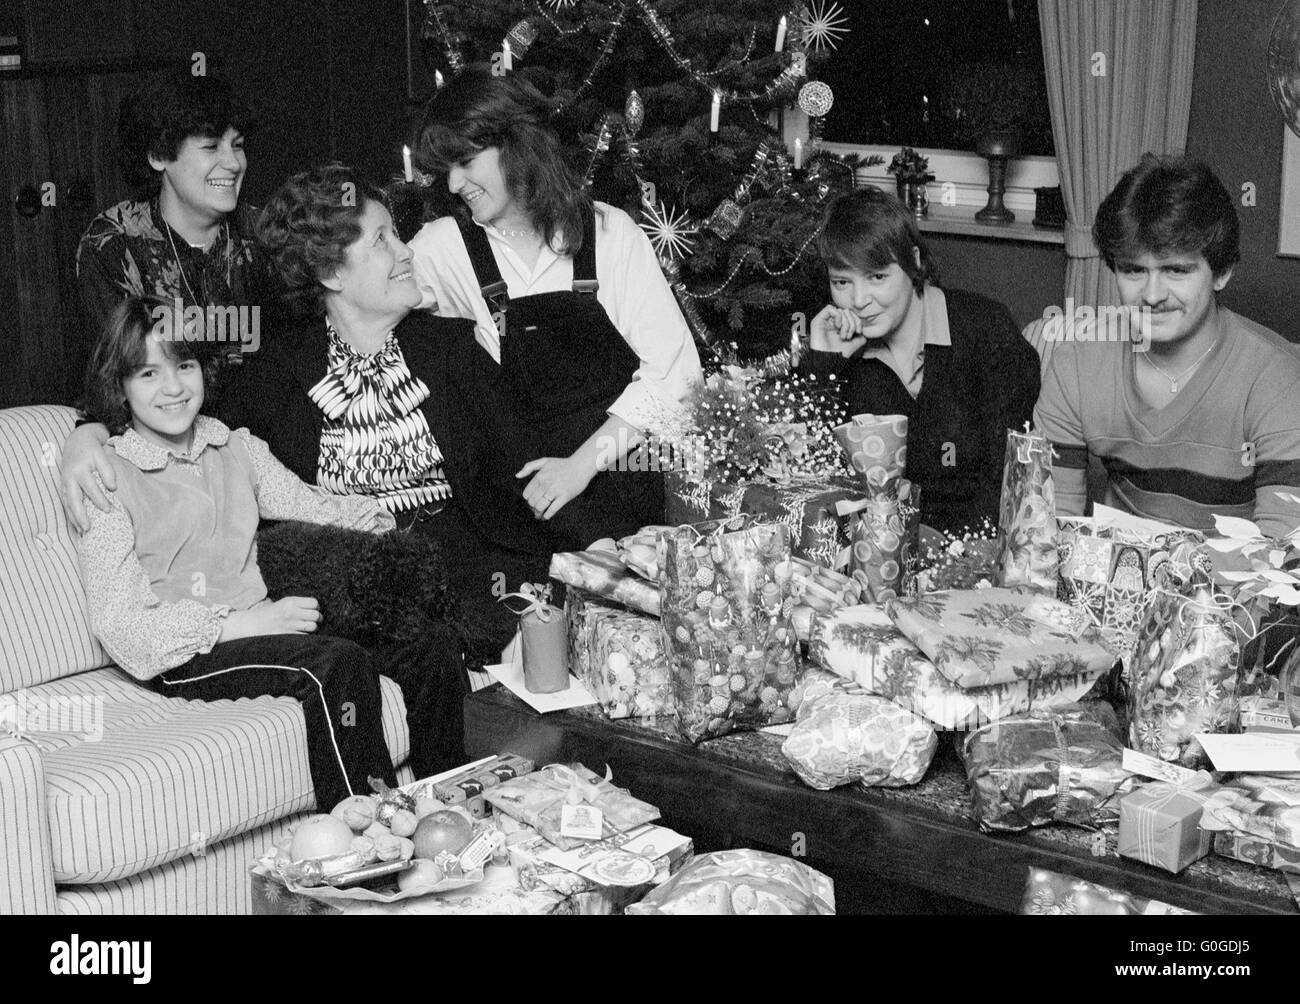 Seventies, black and white photo, festive season, Christmas, Christmas Eve, Christmas tree, festive mood, group of people 10 to 70 years, familiy sitting in the living room, many Christmas presents in gift wrapping paper on the table, pleasure and satisfaction, Frieda, Doris, Monika, Frank, Birgit, Andrea Stock Photo